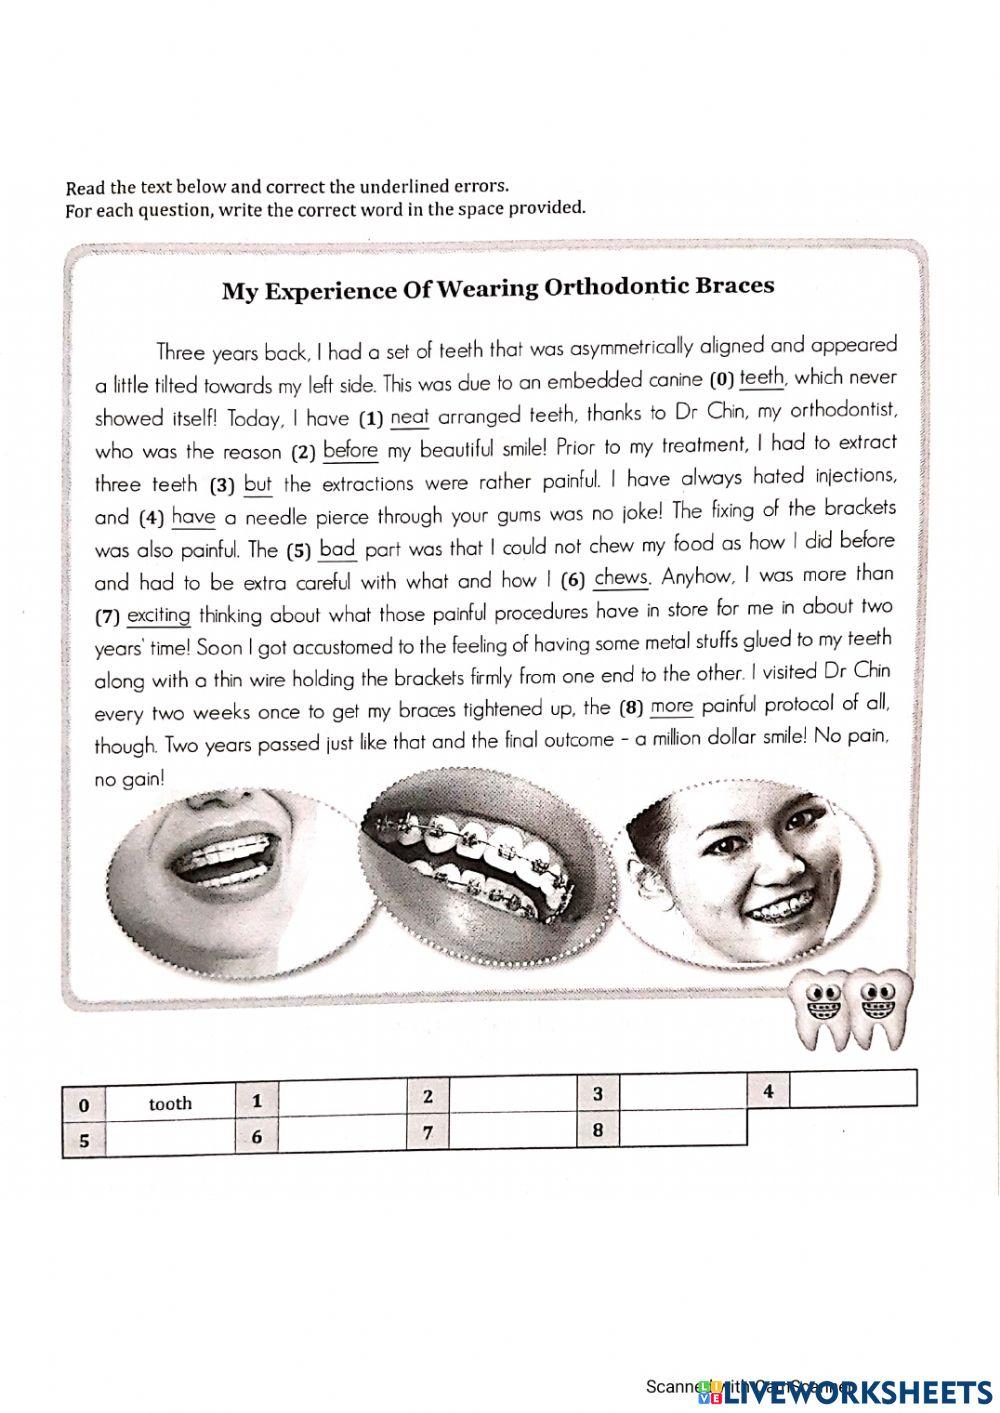 My Experience of Wearing Orthodontic Braces